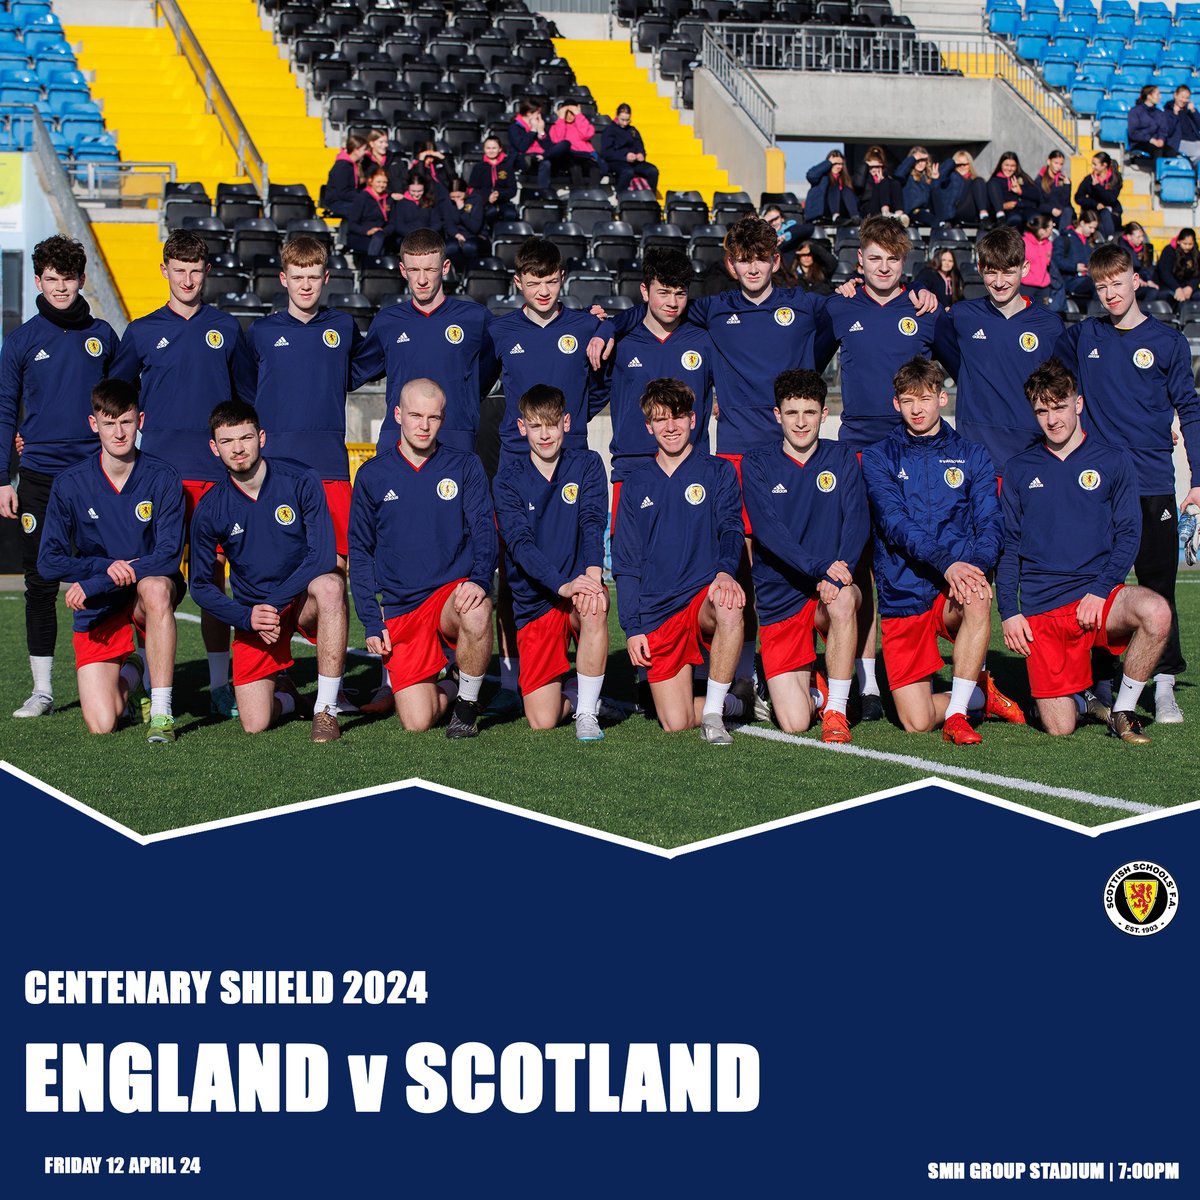 BOYS INTERNATIONAL 🏴󠁧󠁢󠁳󠁣󠁴󠁿 | If you can't make it to Chesterfield to cheer the boys on, you can watch the game live on @C4Sport C'mon Scotland